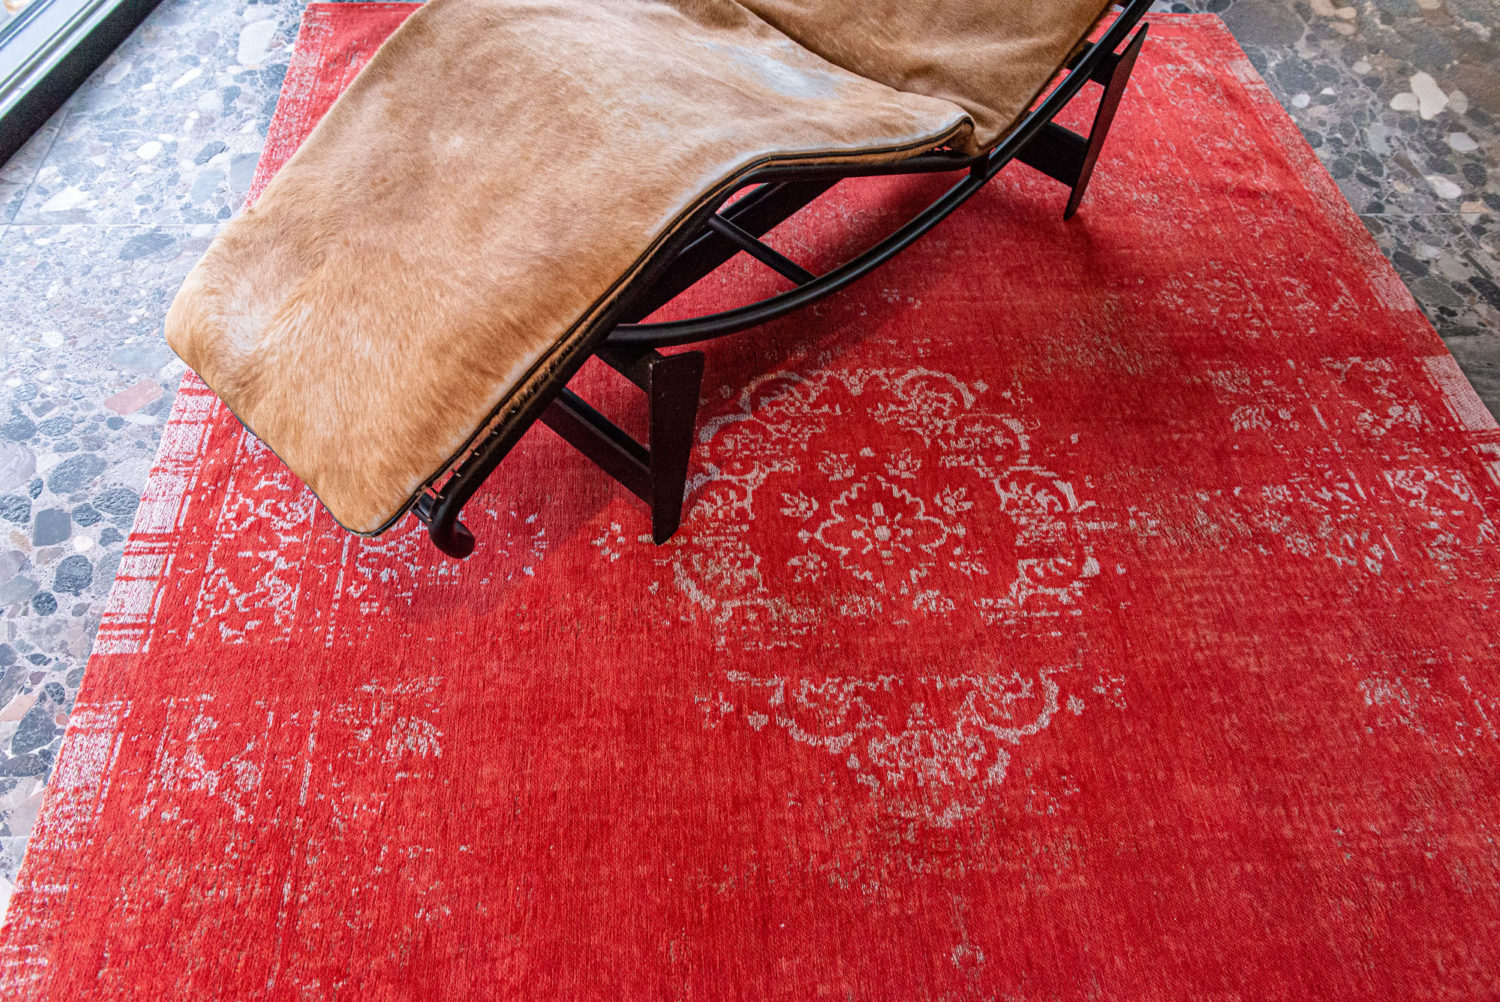 The central pattern or medallion of this rug is an ancient classic.